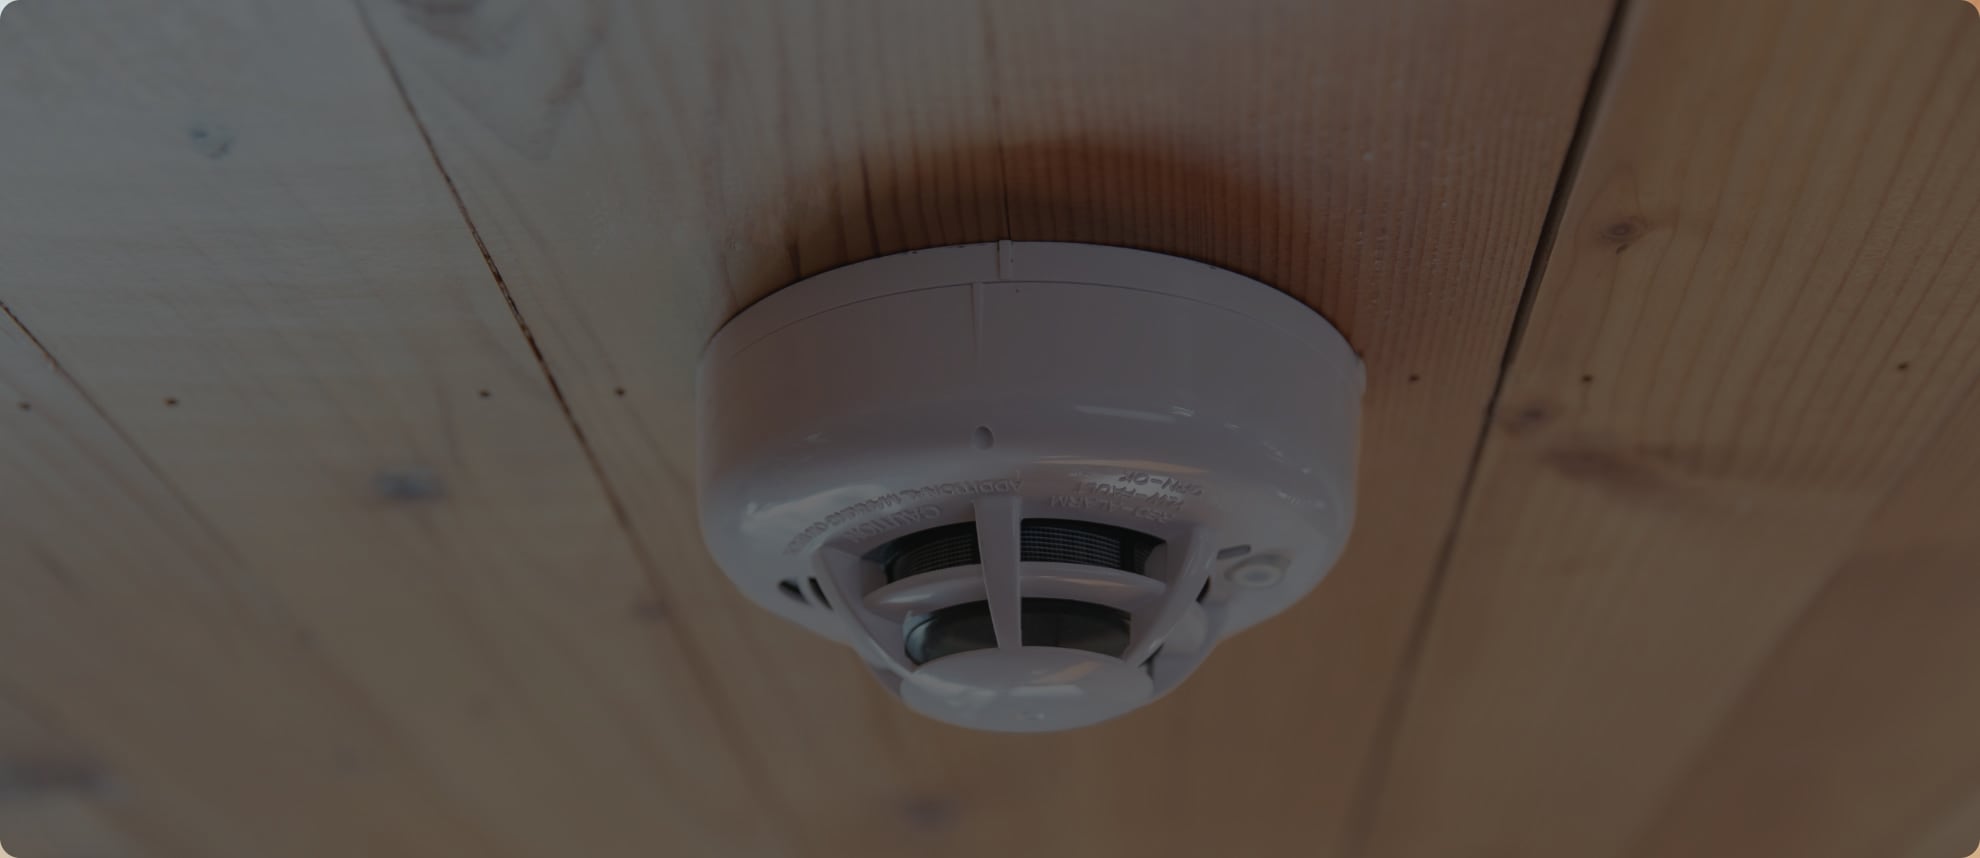 Vivint Monitored Smoke Alarm in Manchester